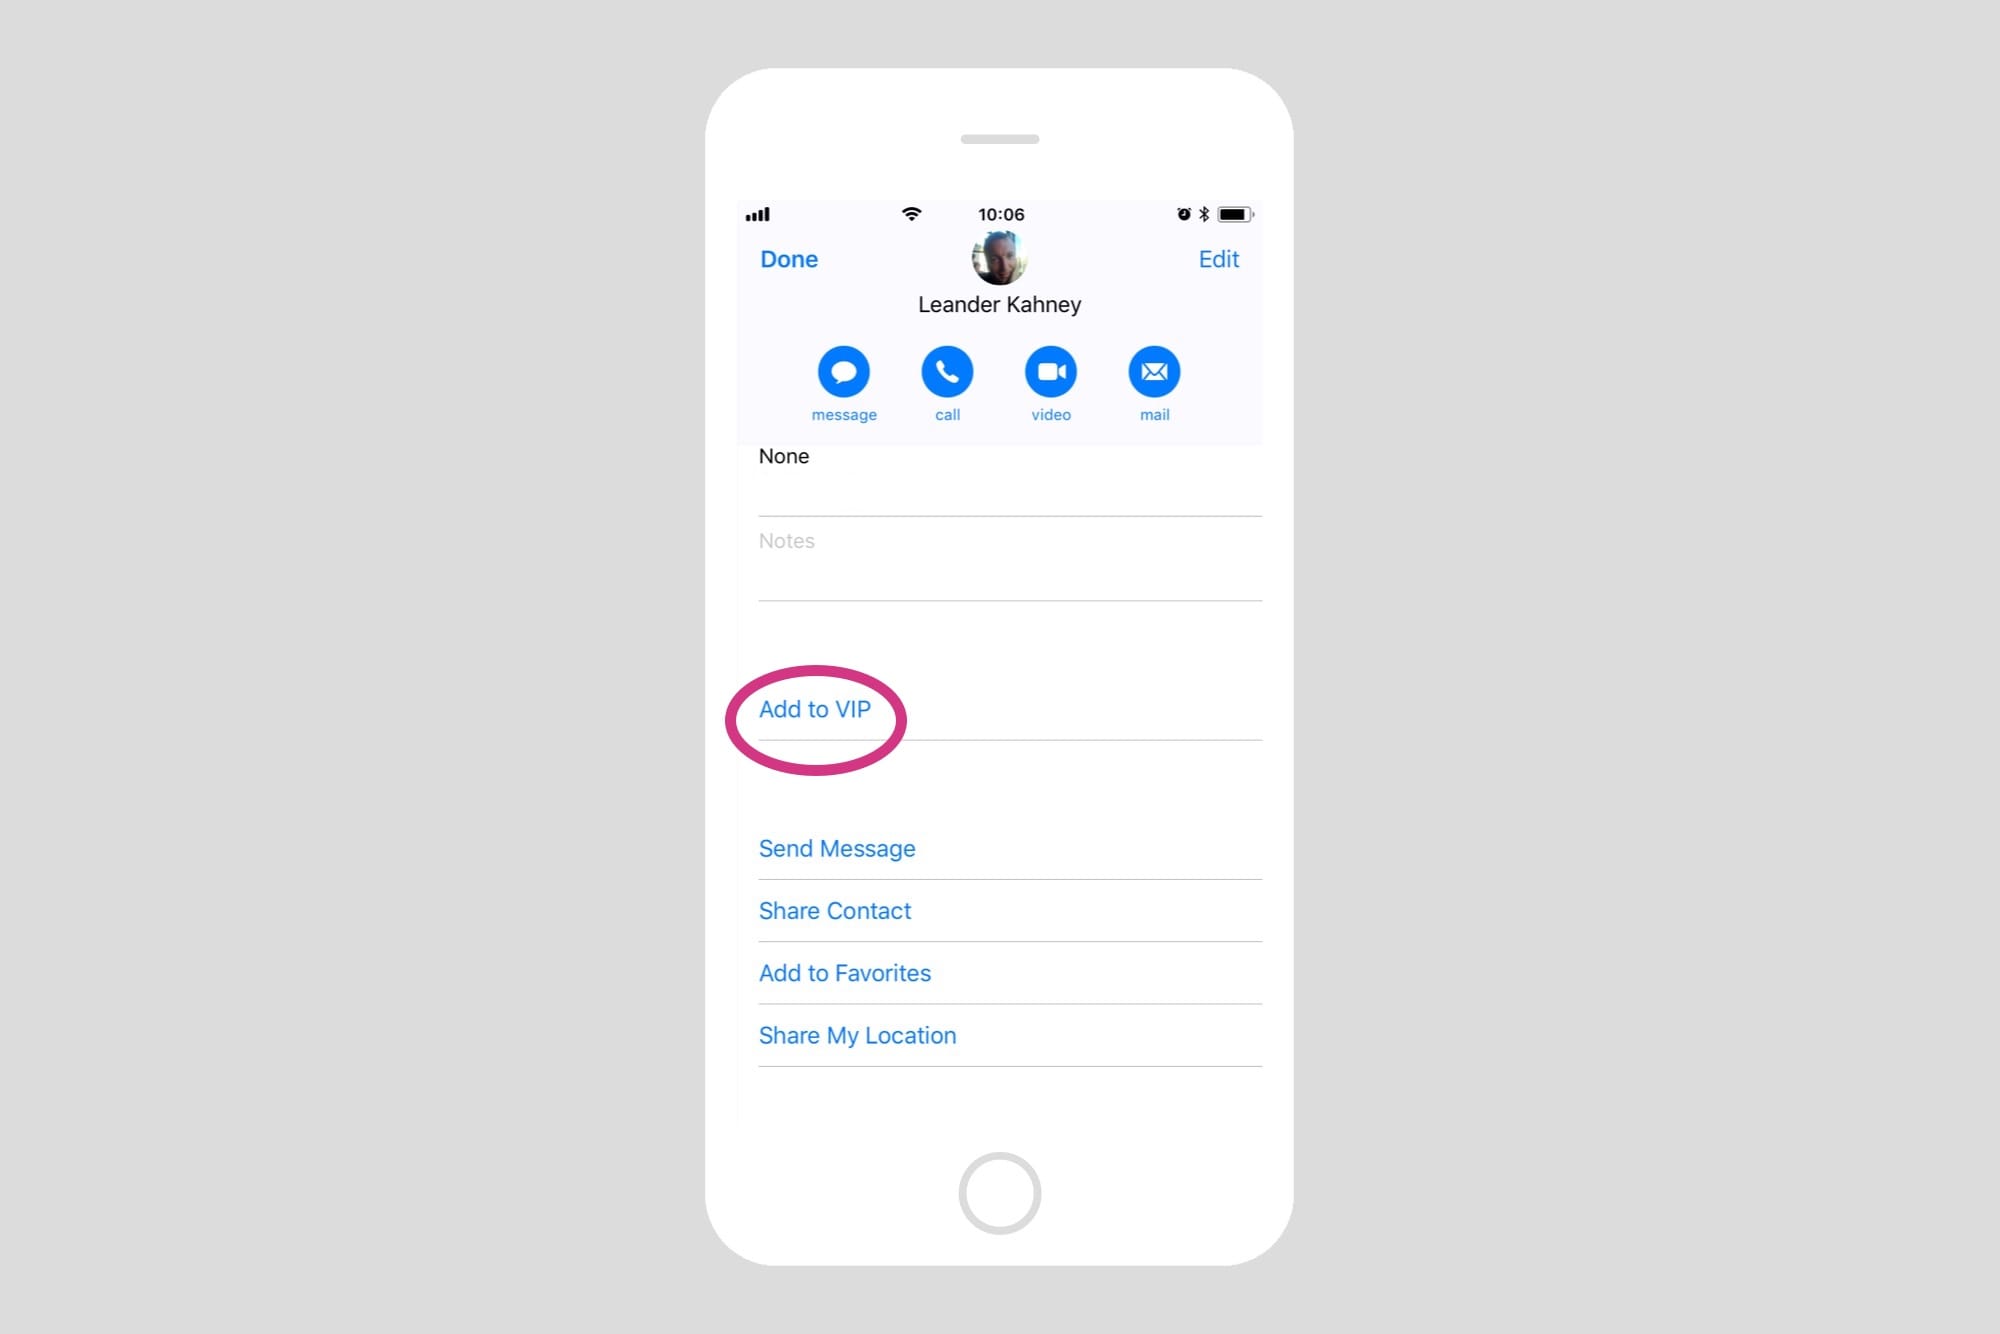 Adding contacts to the VIP list is easy.